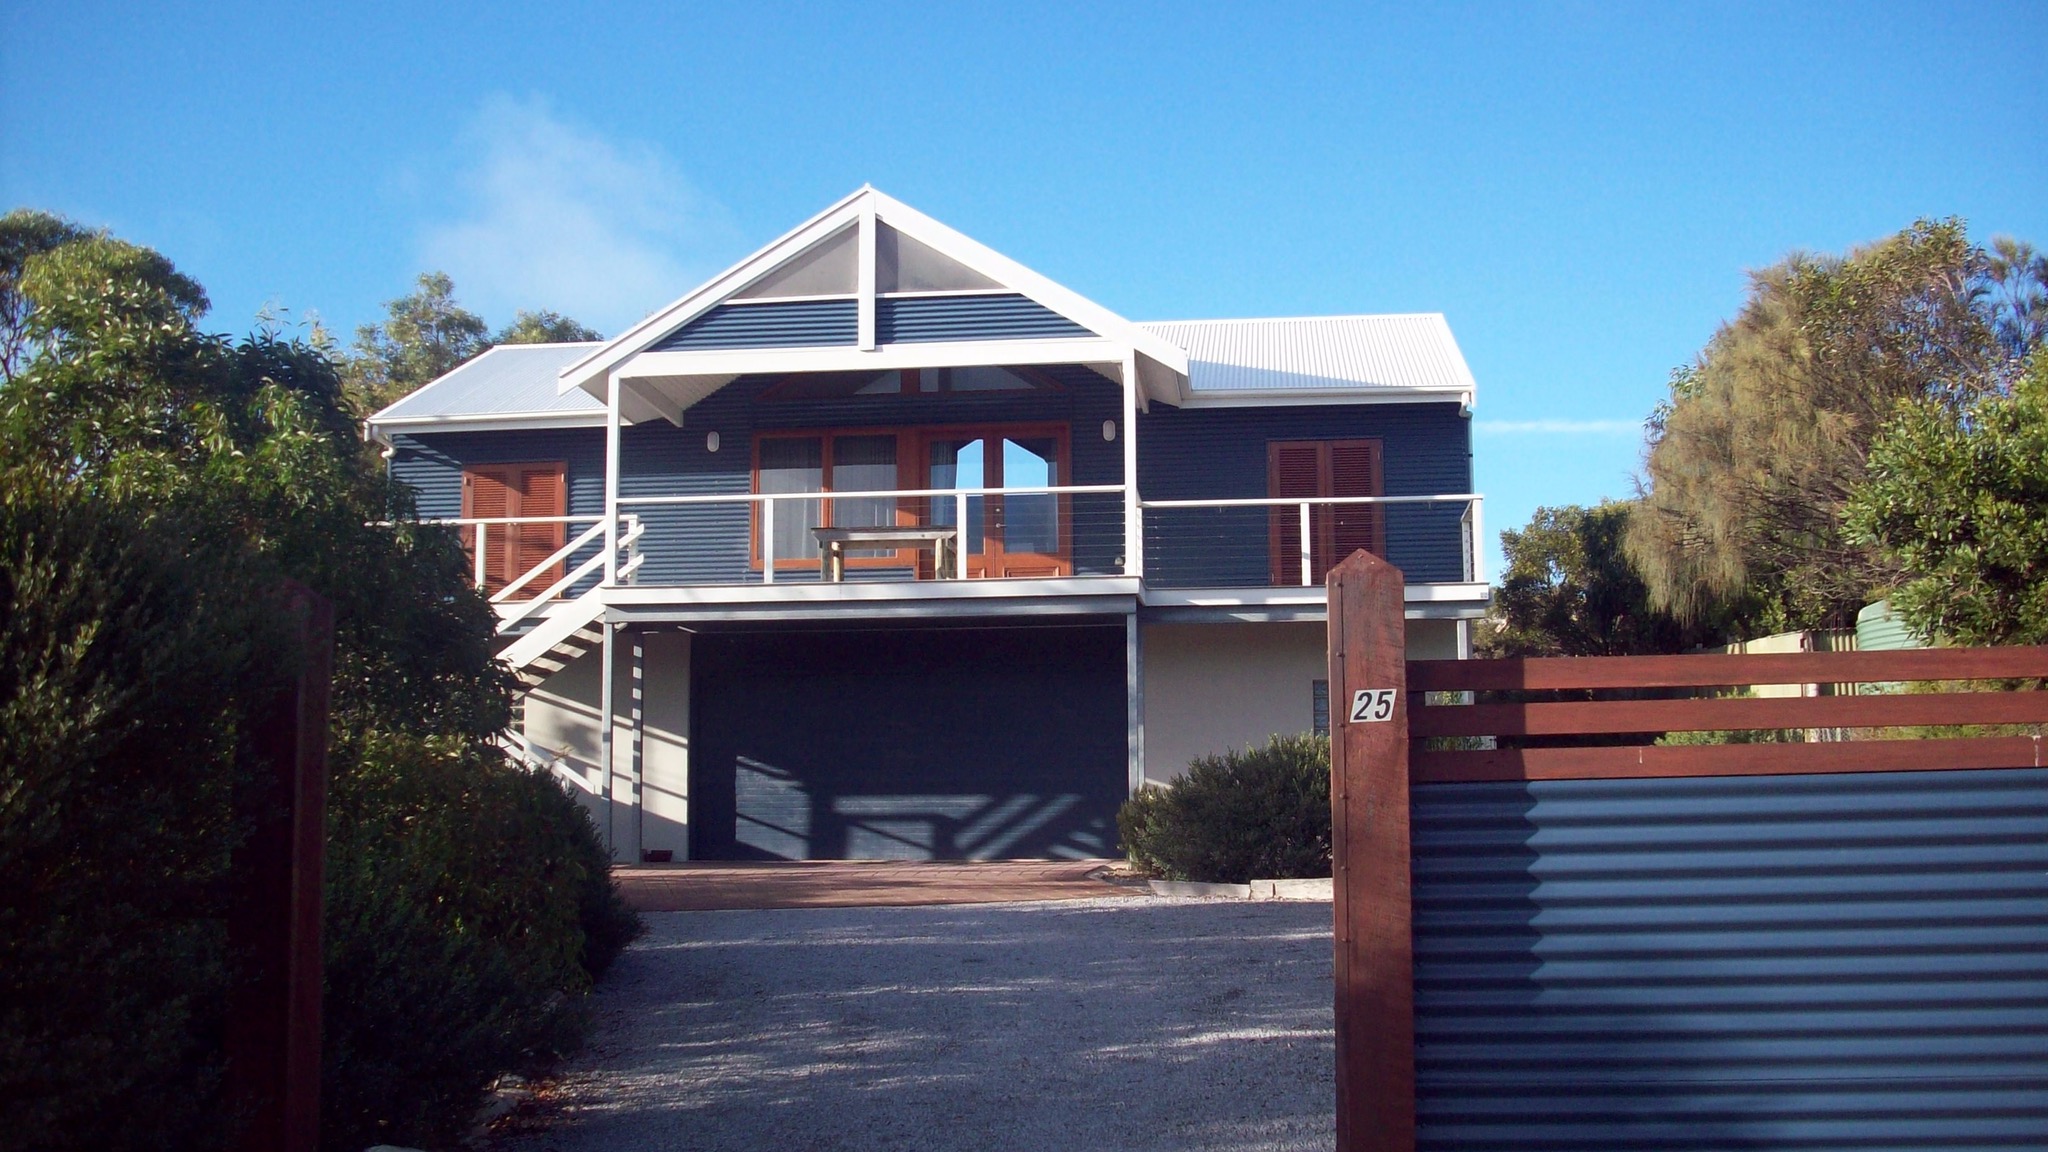 Top Deck Marion Bay - Dalby Accommodation